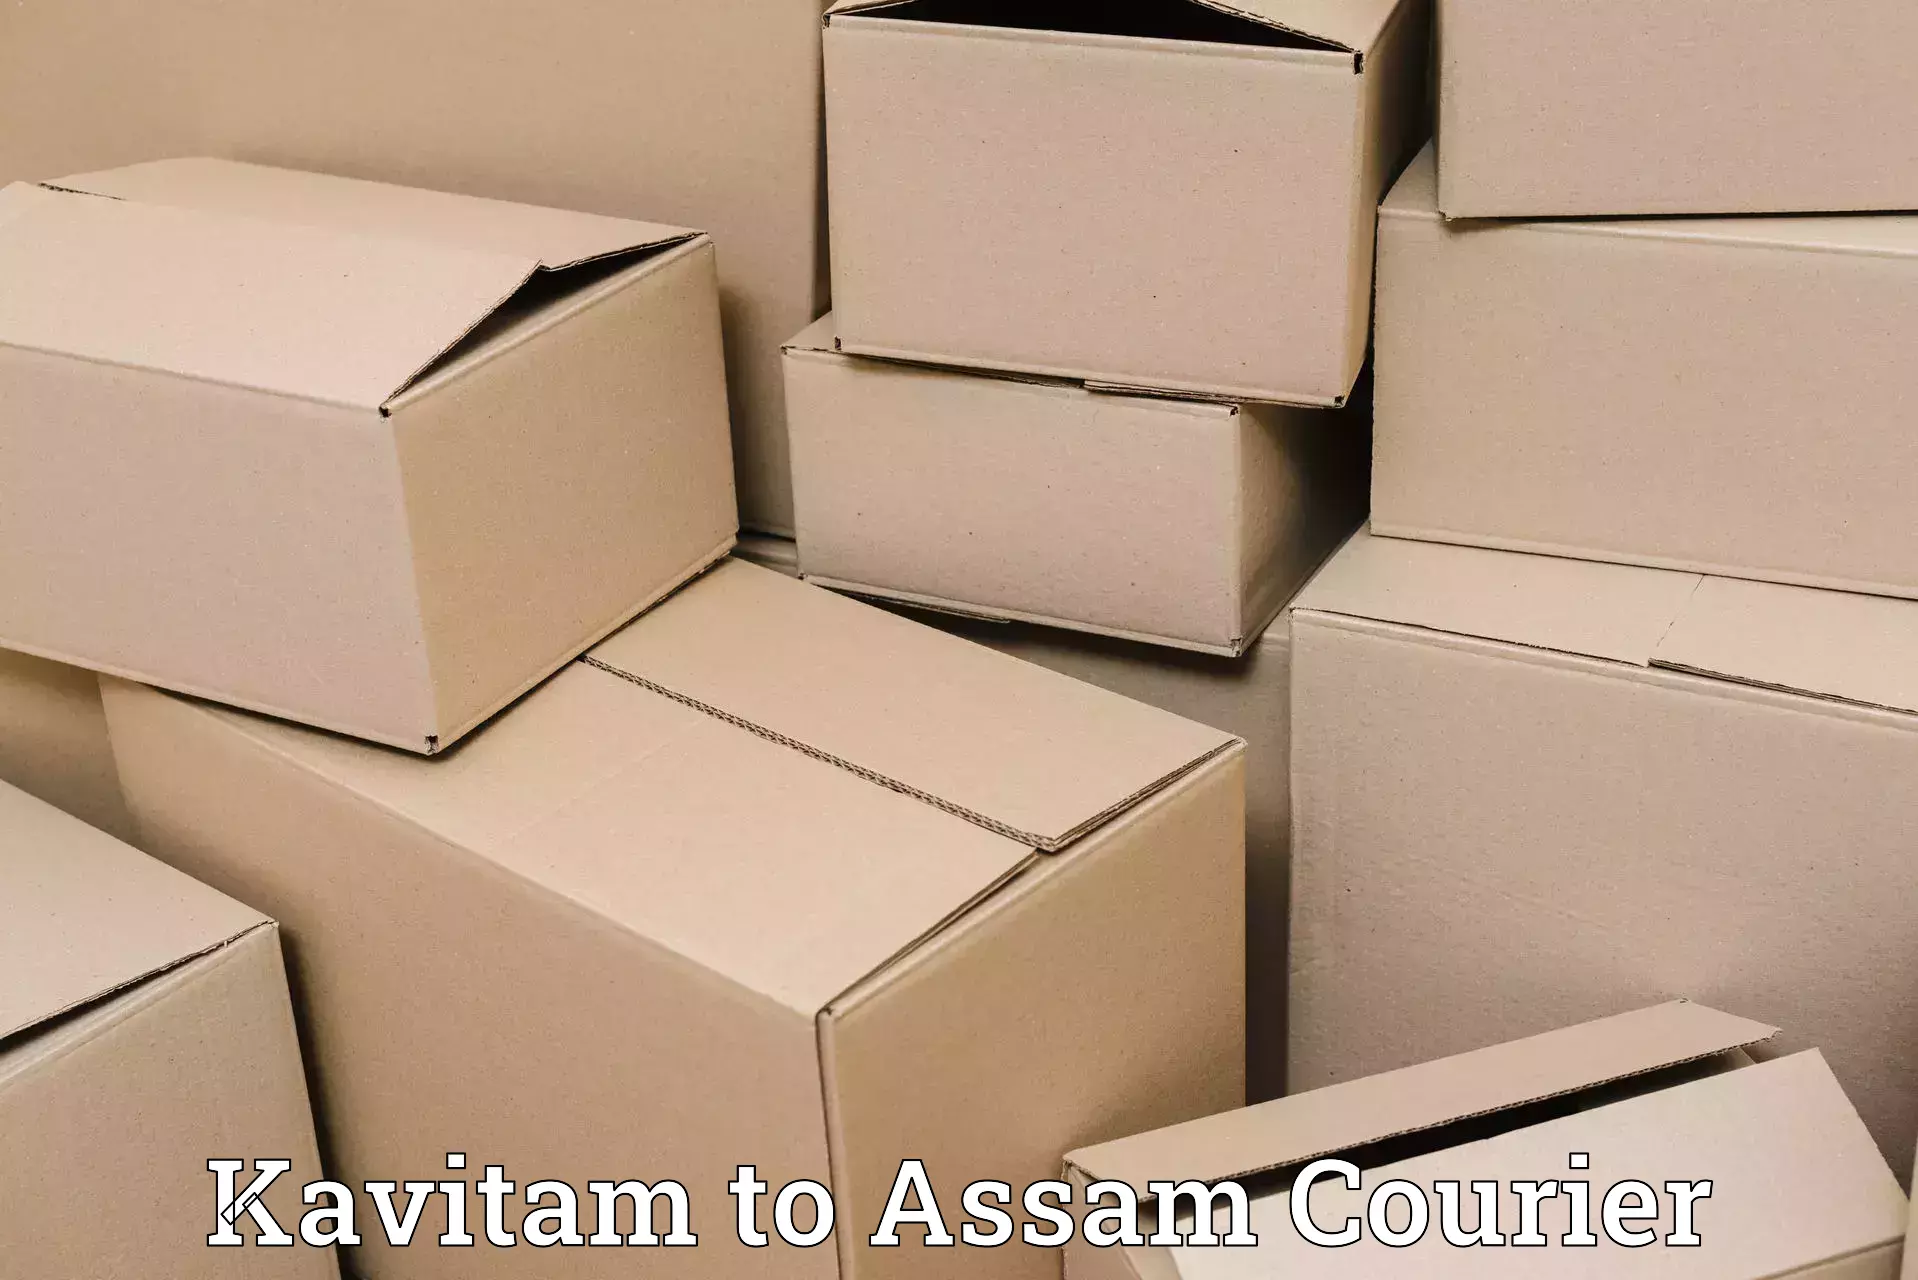 Courier service comparison Kavitam to Dhing Town